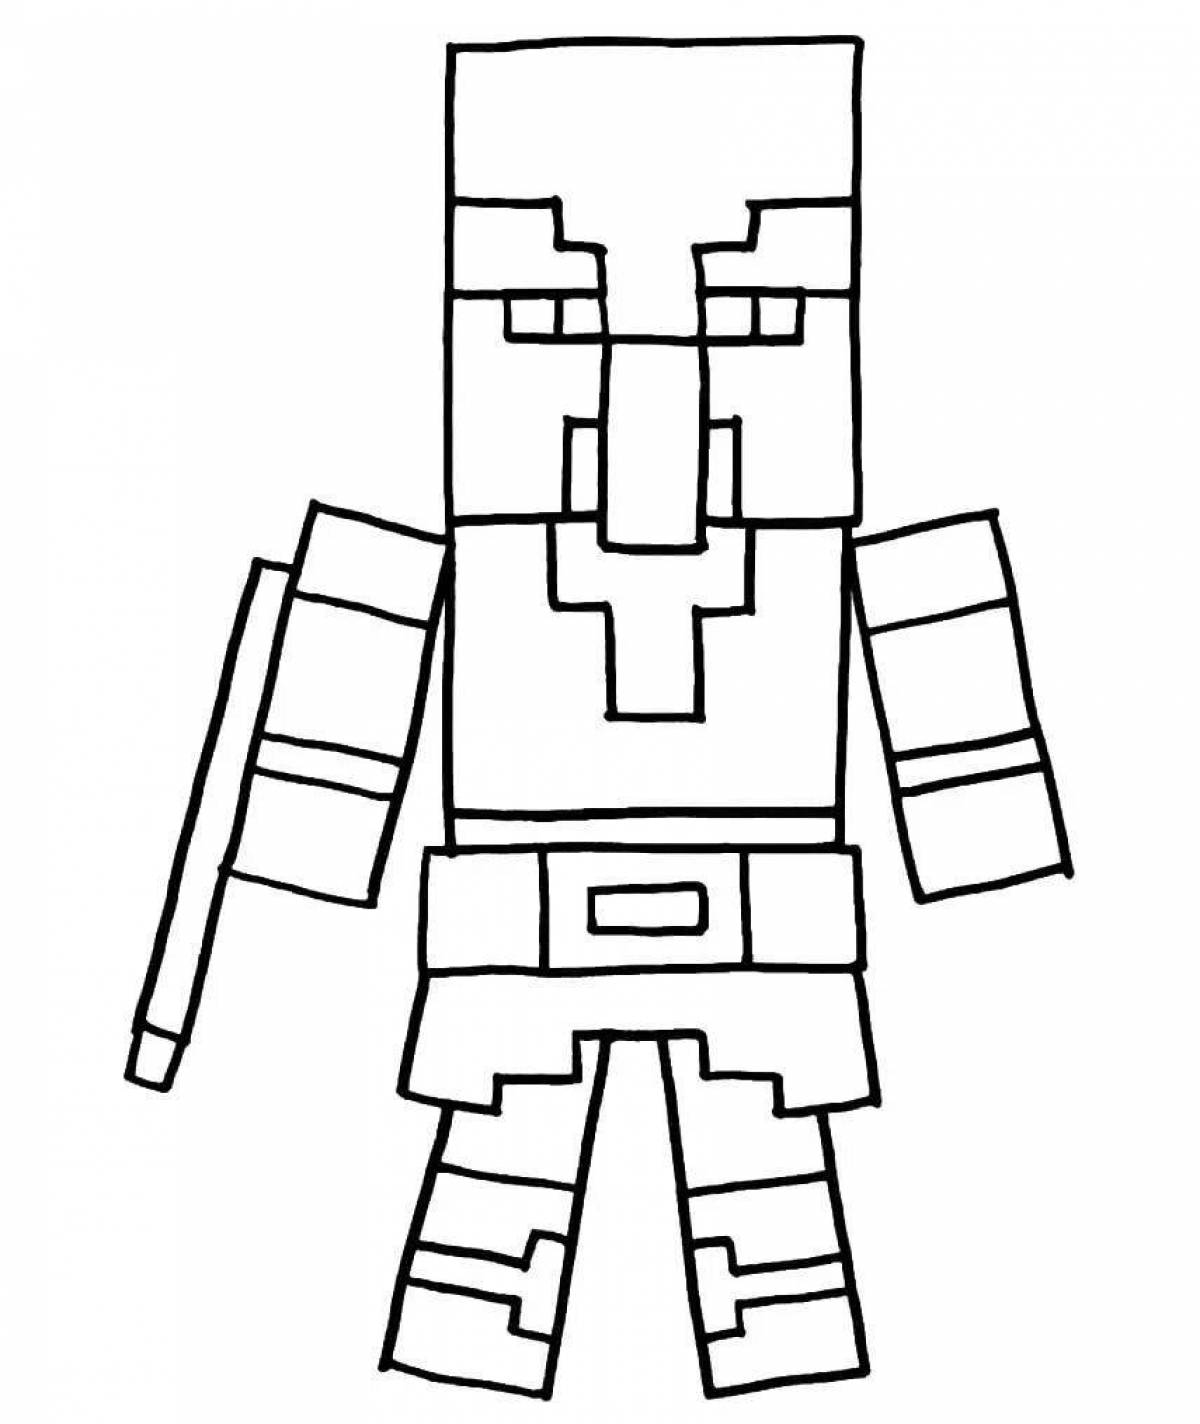 Minecraft resident coloring page